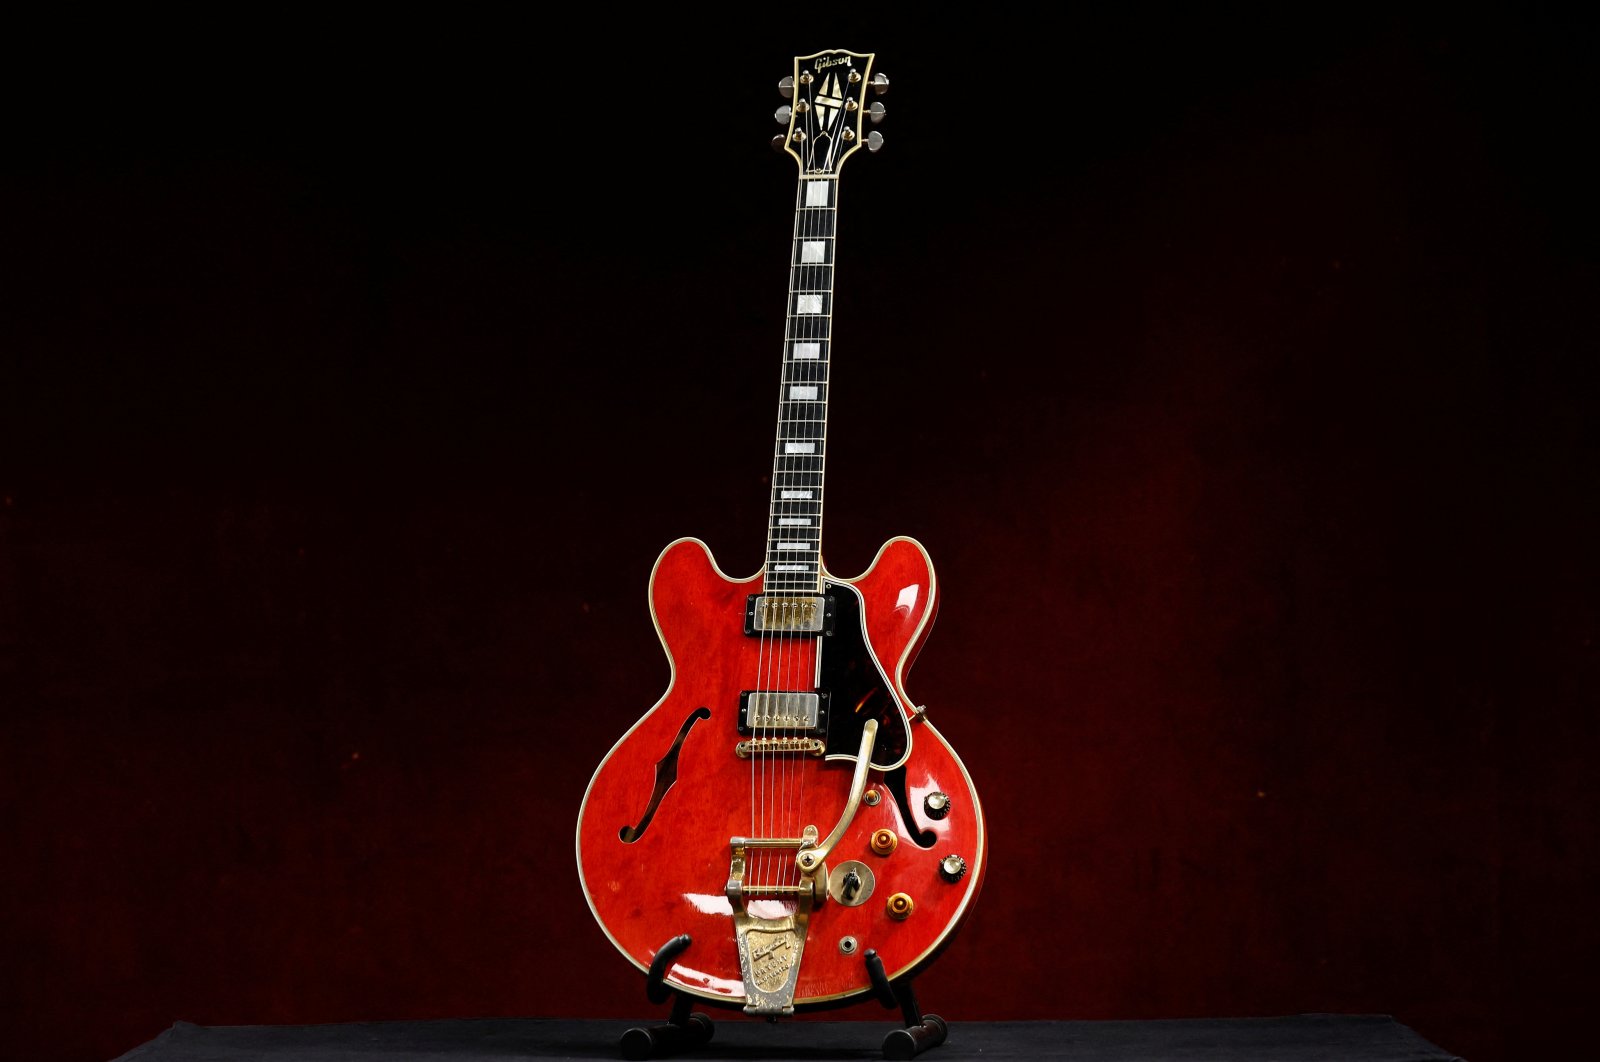 The Oasis band member Noel Gallagher&#039;s Gibson ES-355 guitar, destroyed during an argument with his brother at Paris&#039; Rock en Seine festival in 2009, is displayed during a media preview at Hotel Drouot ahead of the auction in Paris, France, May 13, 2022. (REUTERS)